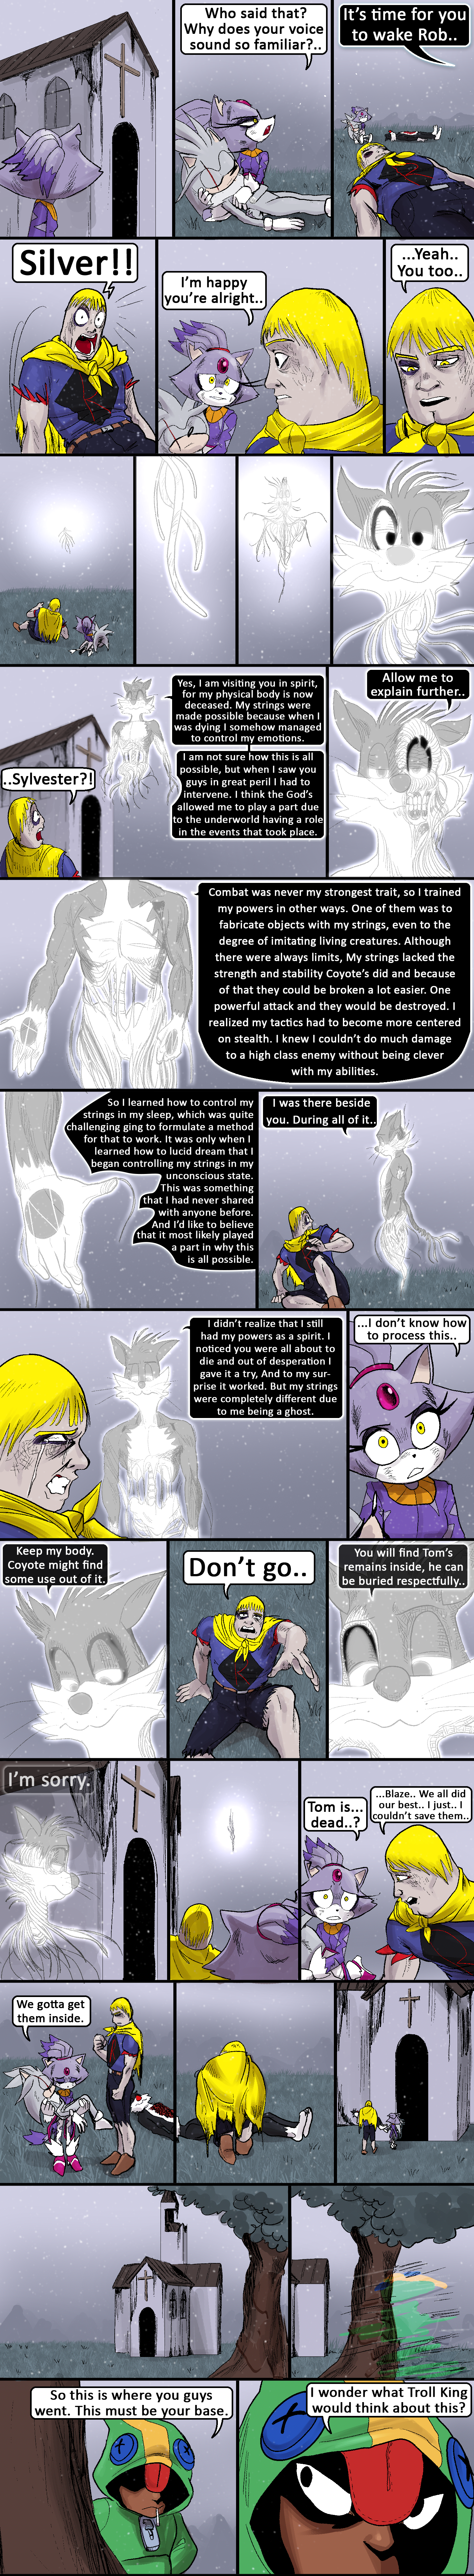 ch26/pg35.png. If you're seeing this, enable images. Or, perhaps we have a website issue. Try refreshing, if unsuccessful email c@commodorian.org with a detailed description of how you got here.